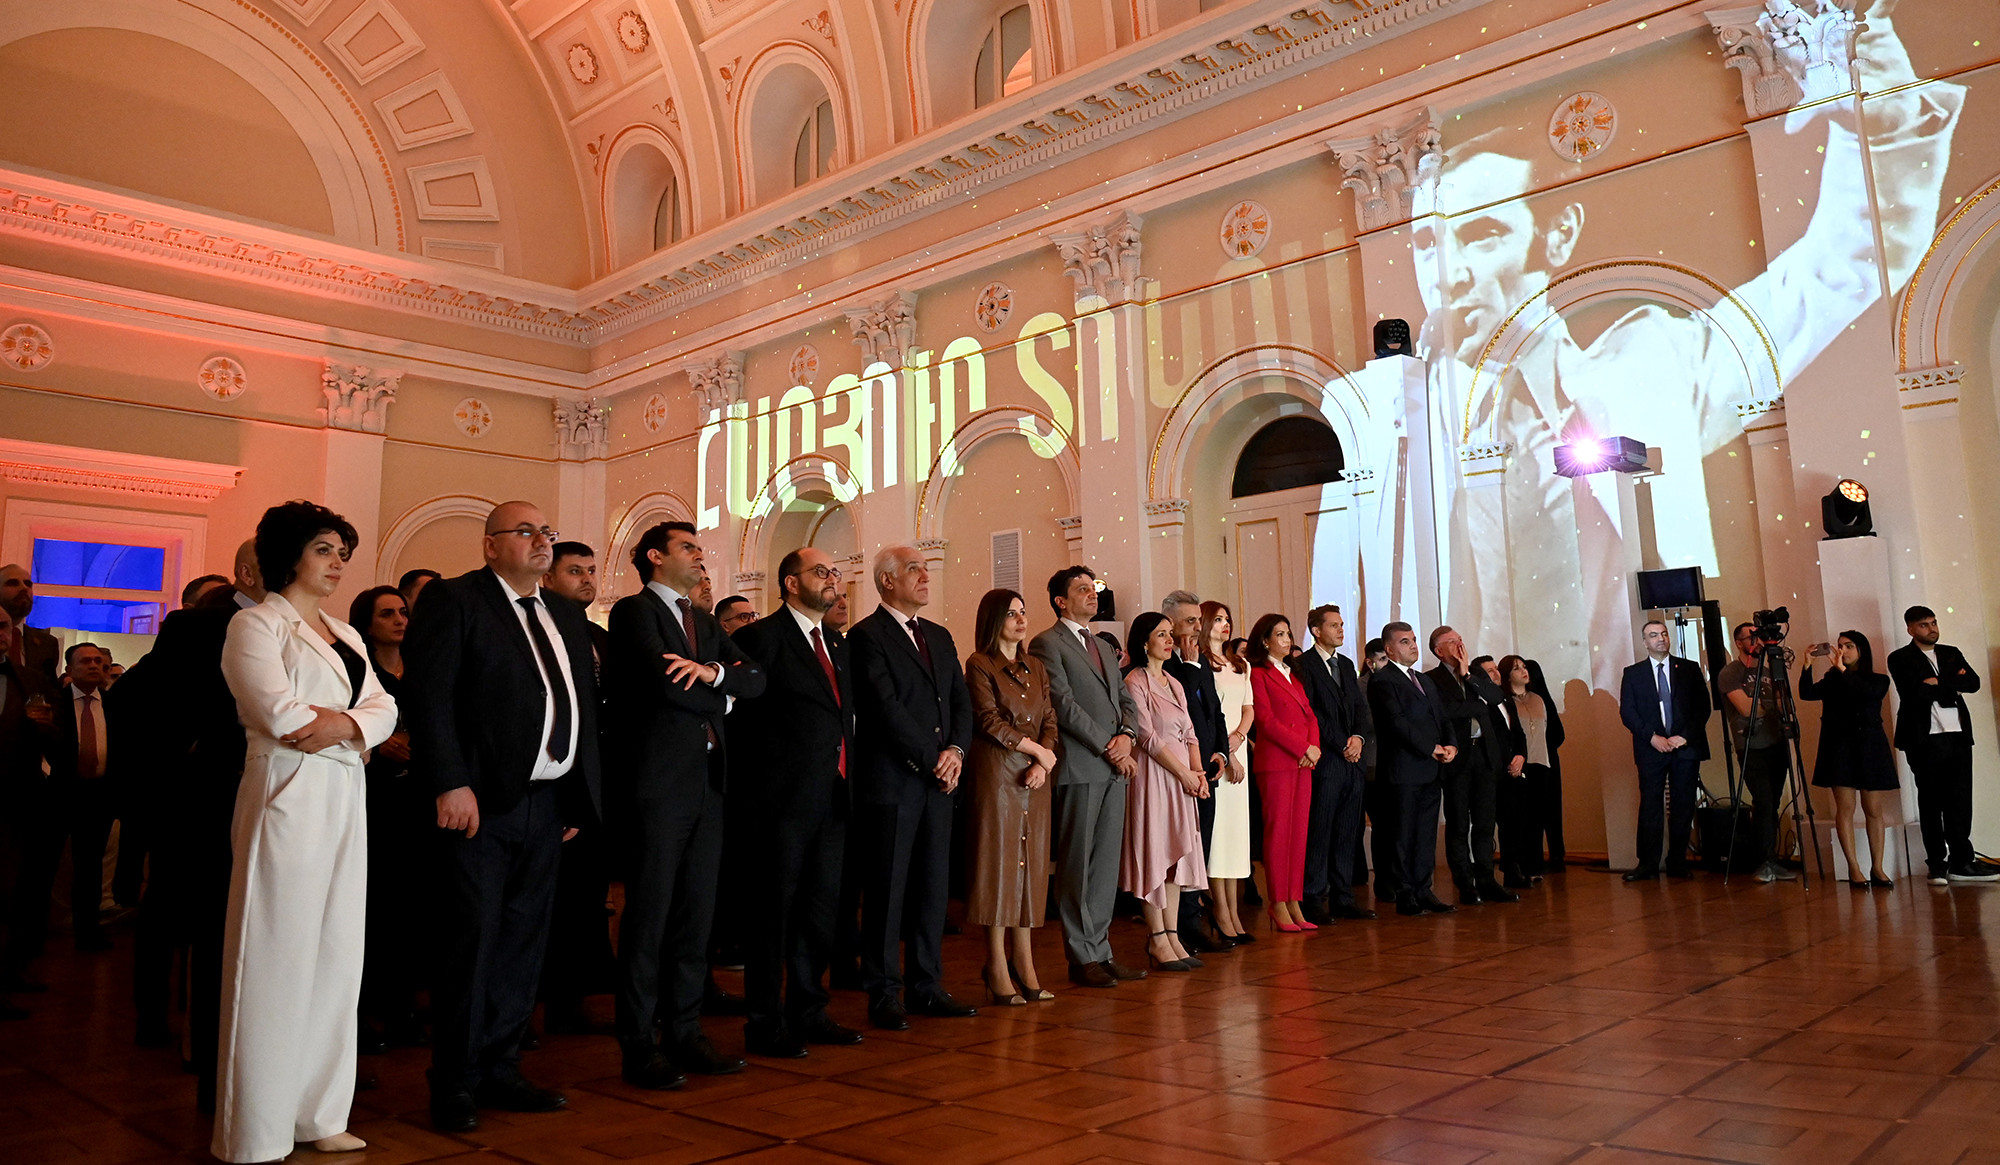 Commemorative events dedicated to 100th anniversary of Charles Aznavour were launched at residence of President of Republic